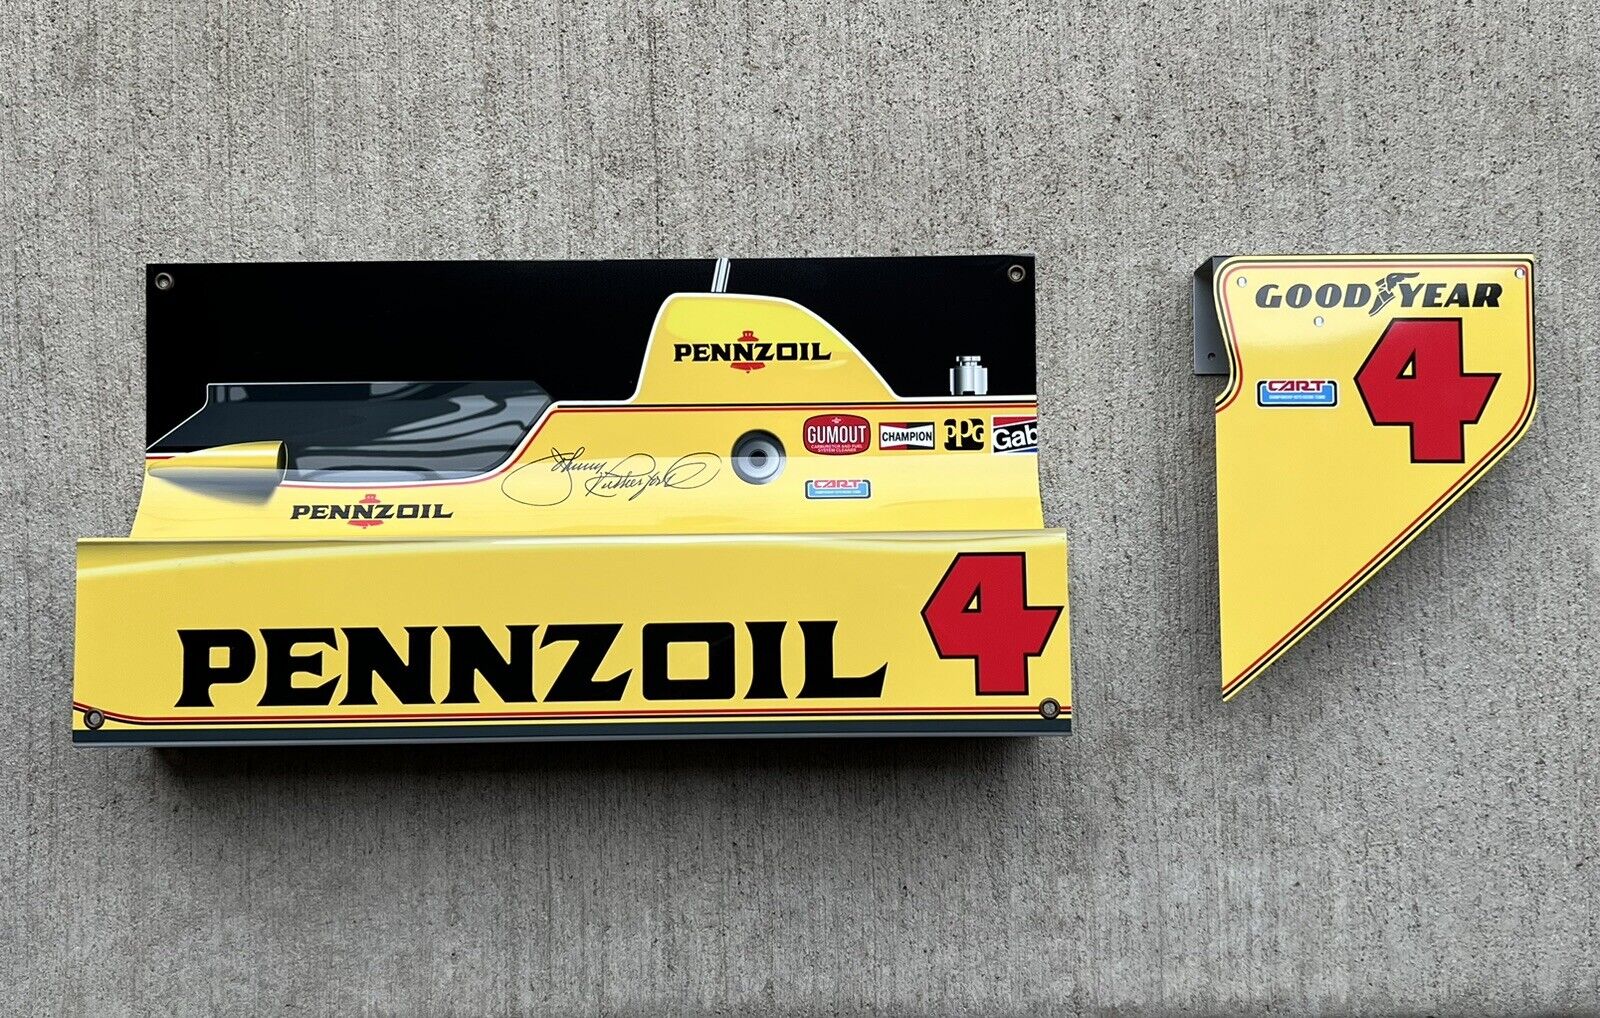 WOW Indy 500 Race Car 3D View 1980 Johnny Rutherford Chaparral